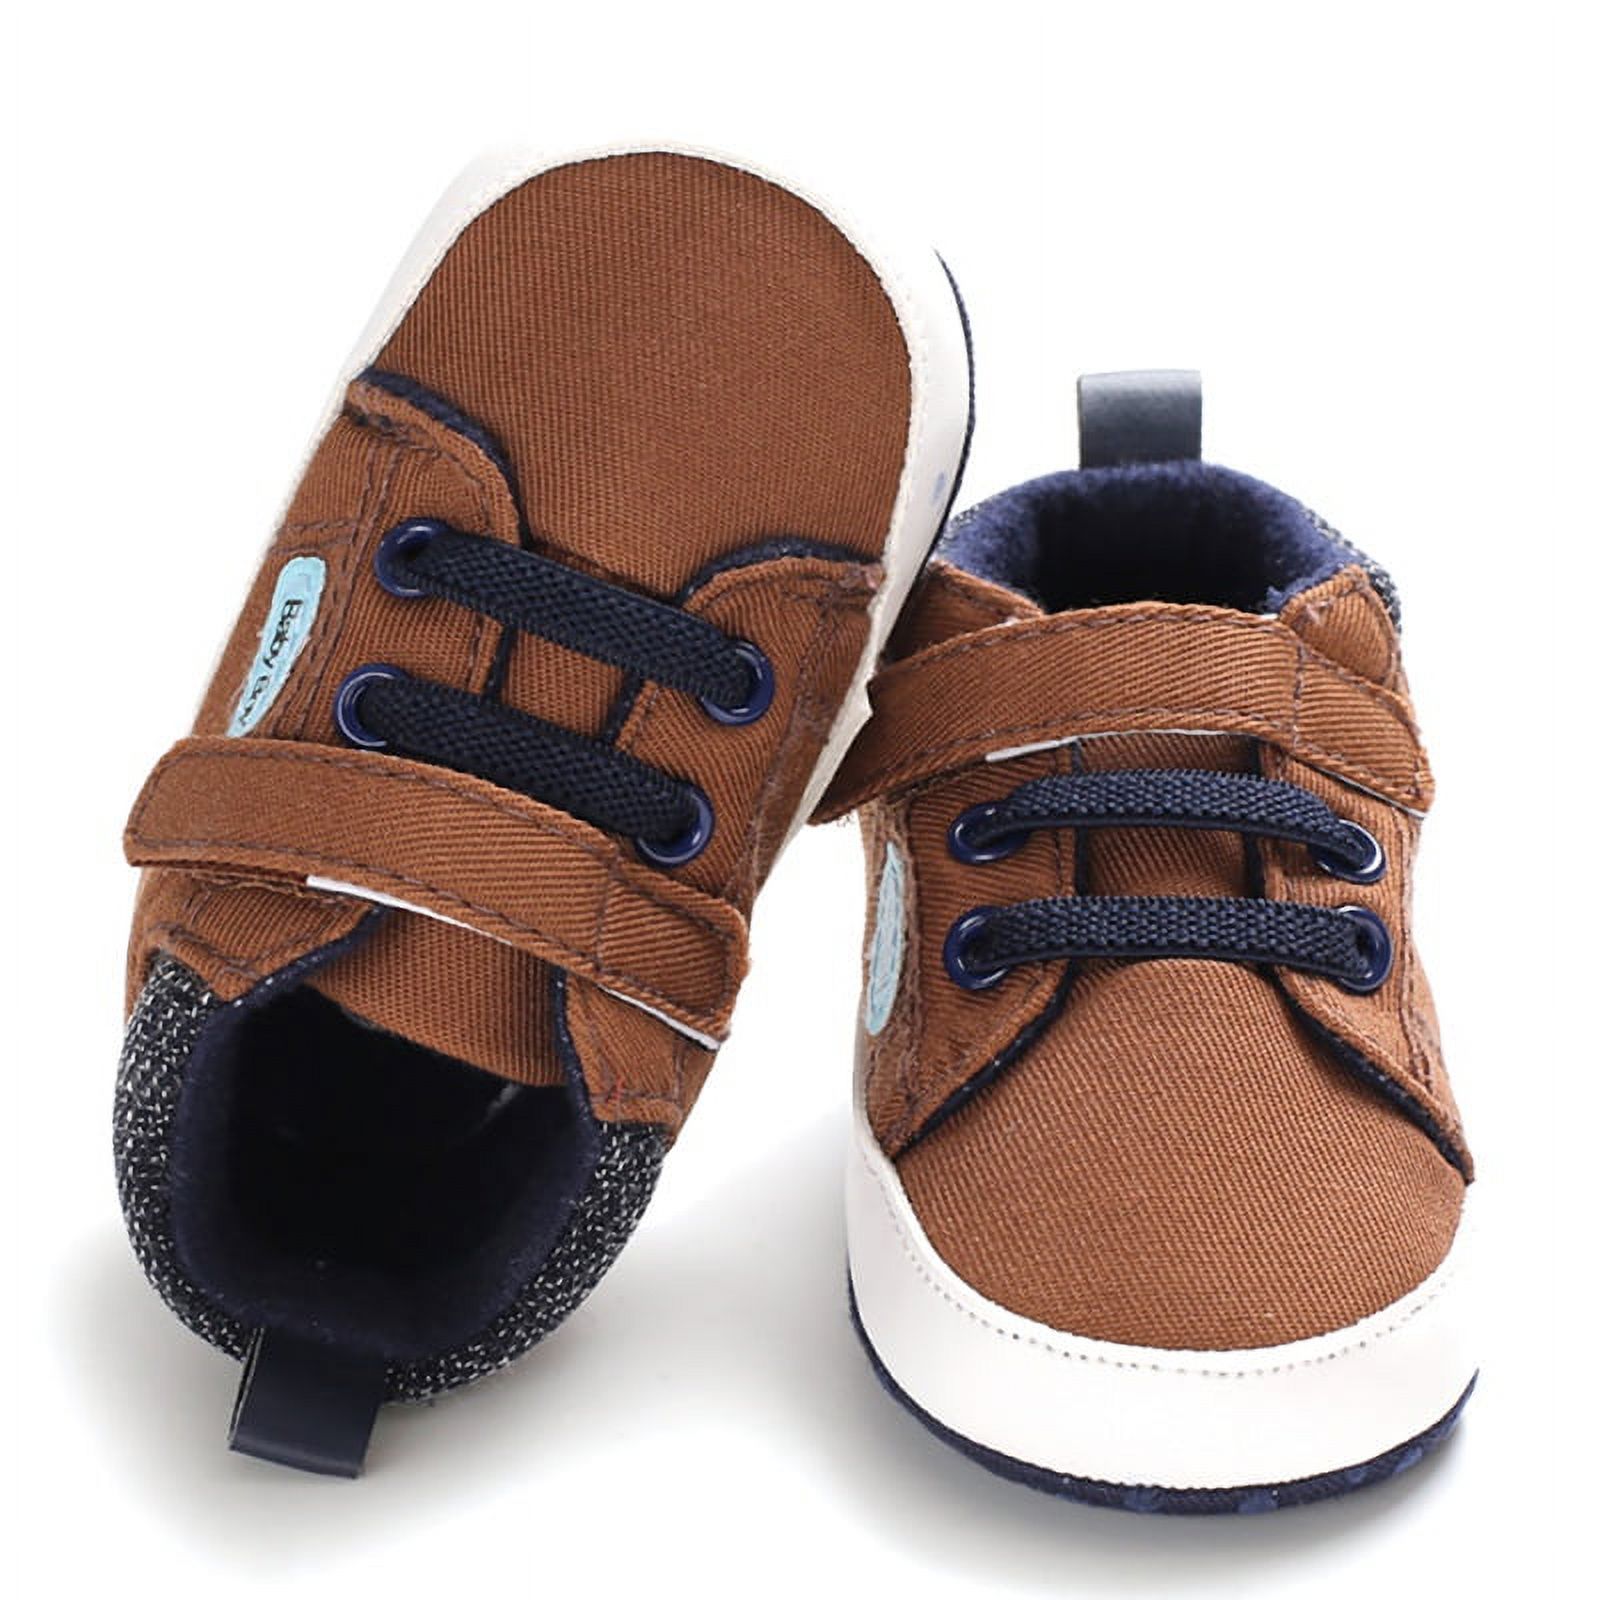 Infant Baby Boys Girls Canvas Toddler Sneakers Rubber Sole Non-Slip Candy Shoes First Walkers Prewalker Crib Shoes - image 5 of 8